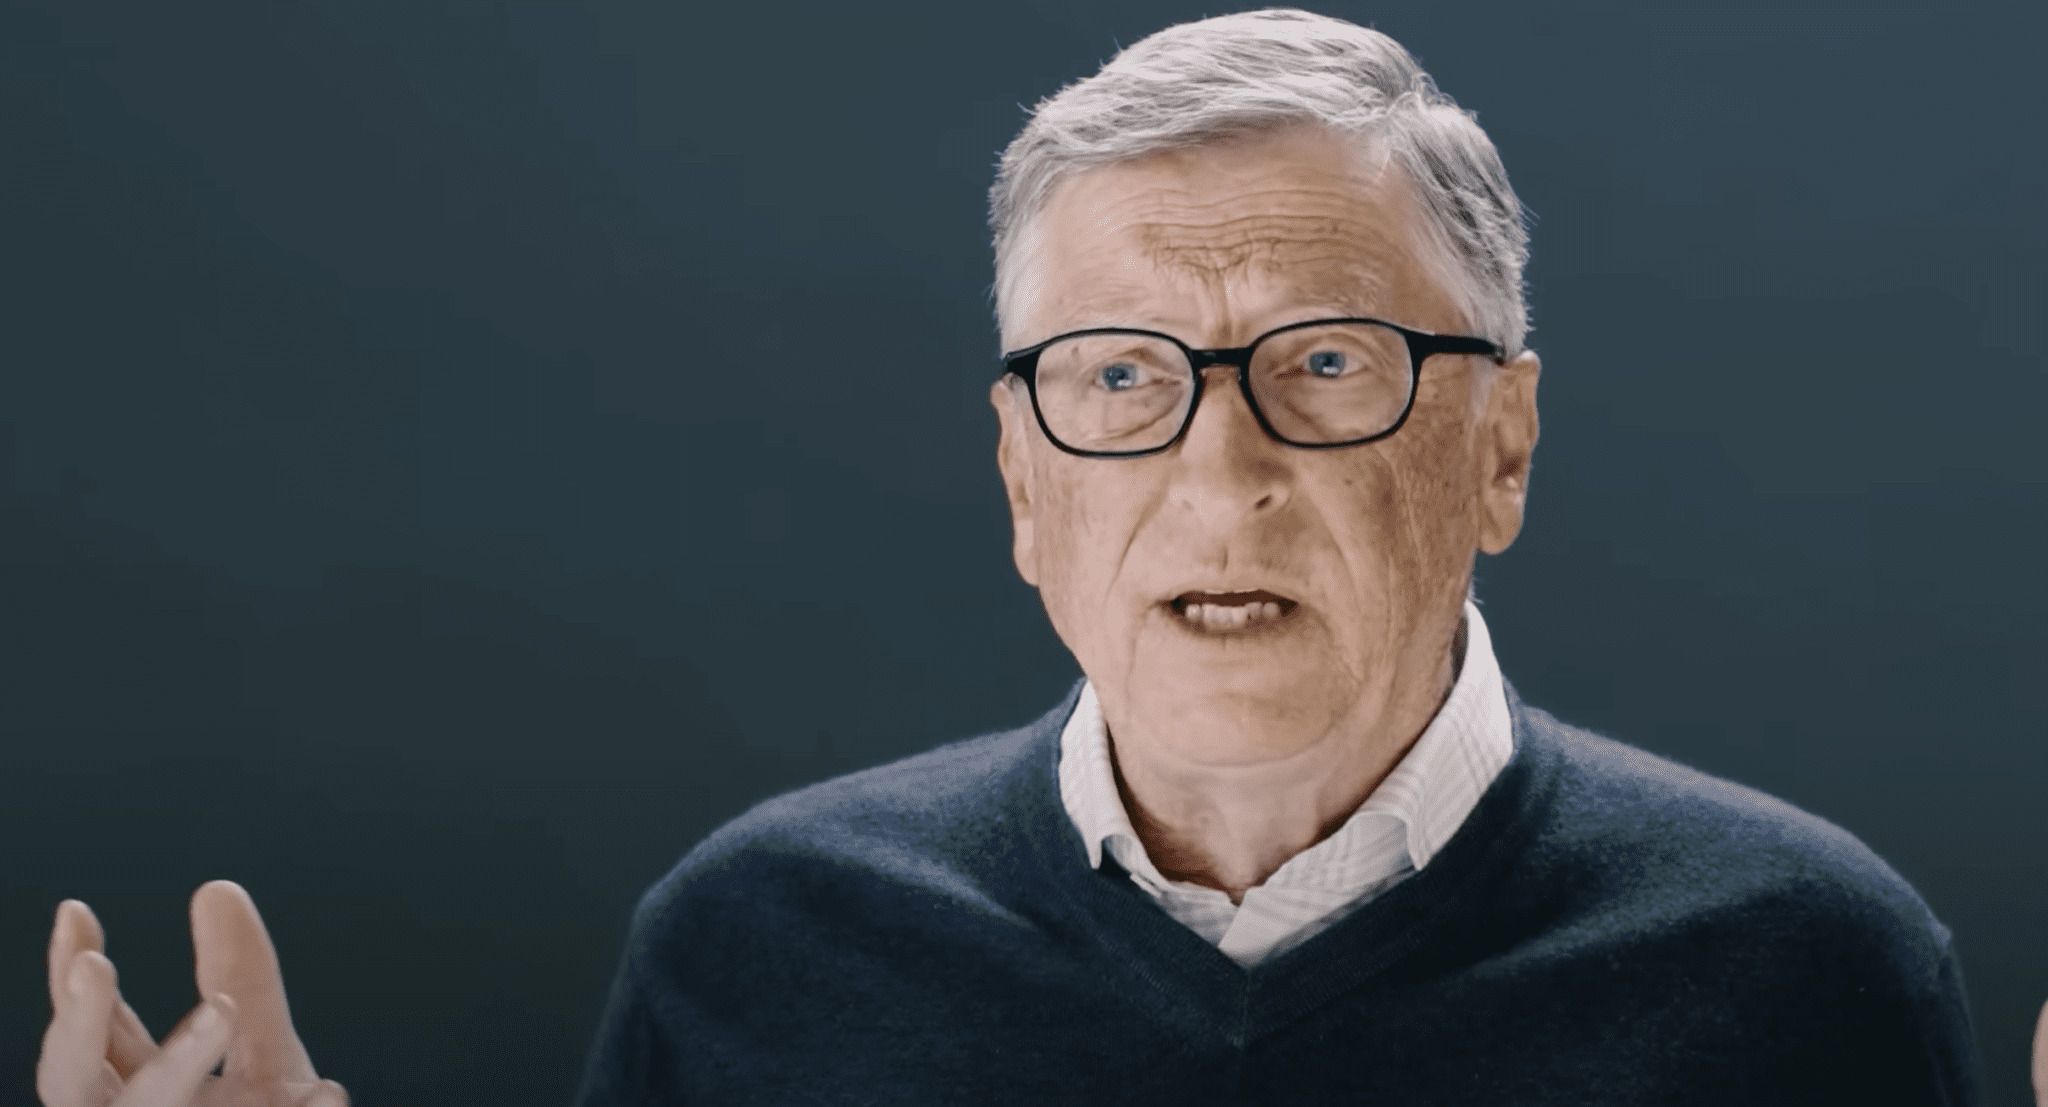 REPORT: Bill Gates Screened Women For STDs Before He Would Hire Them! | WLT Report